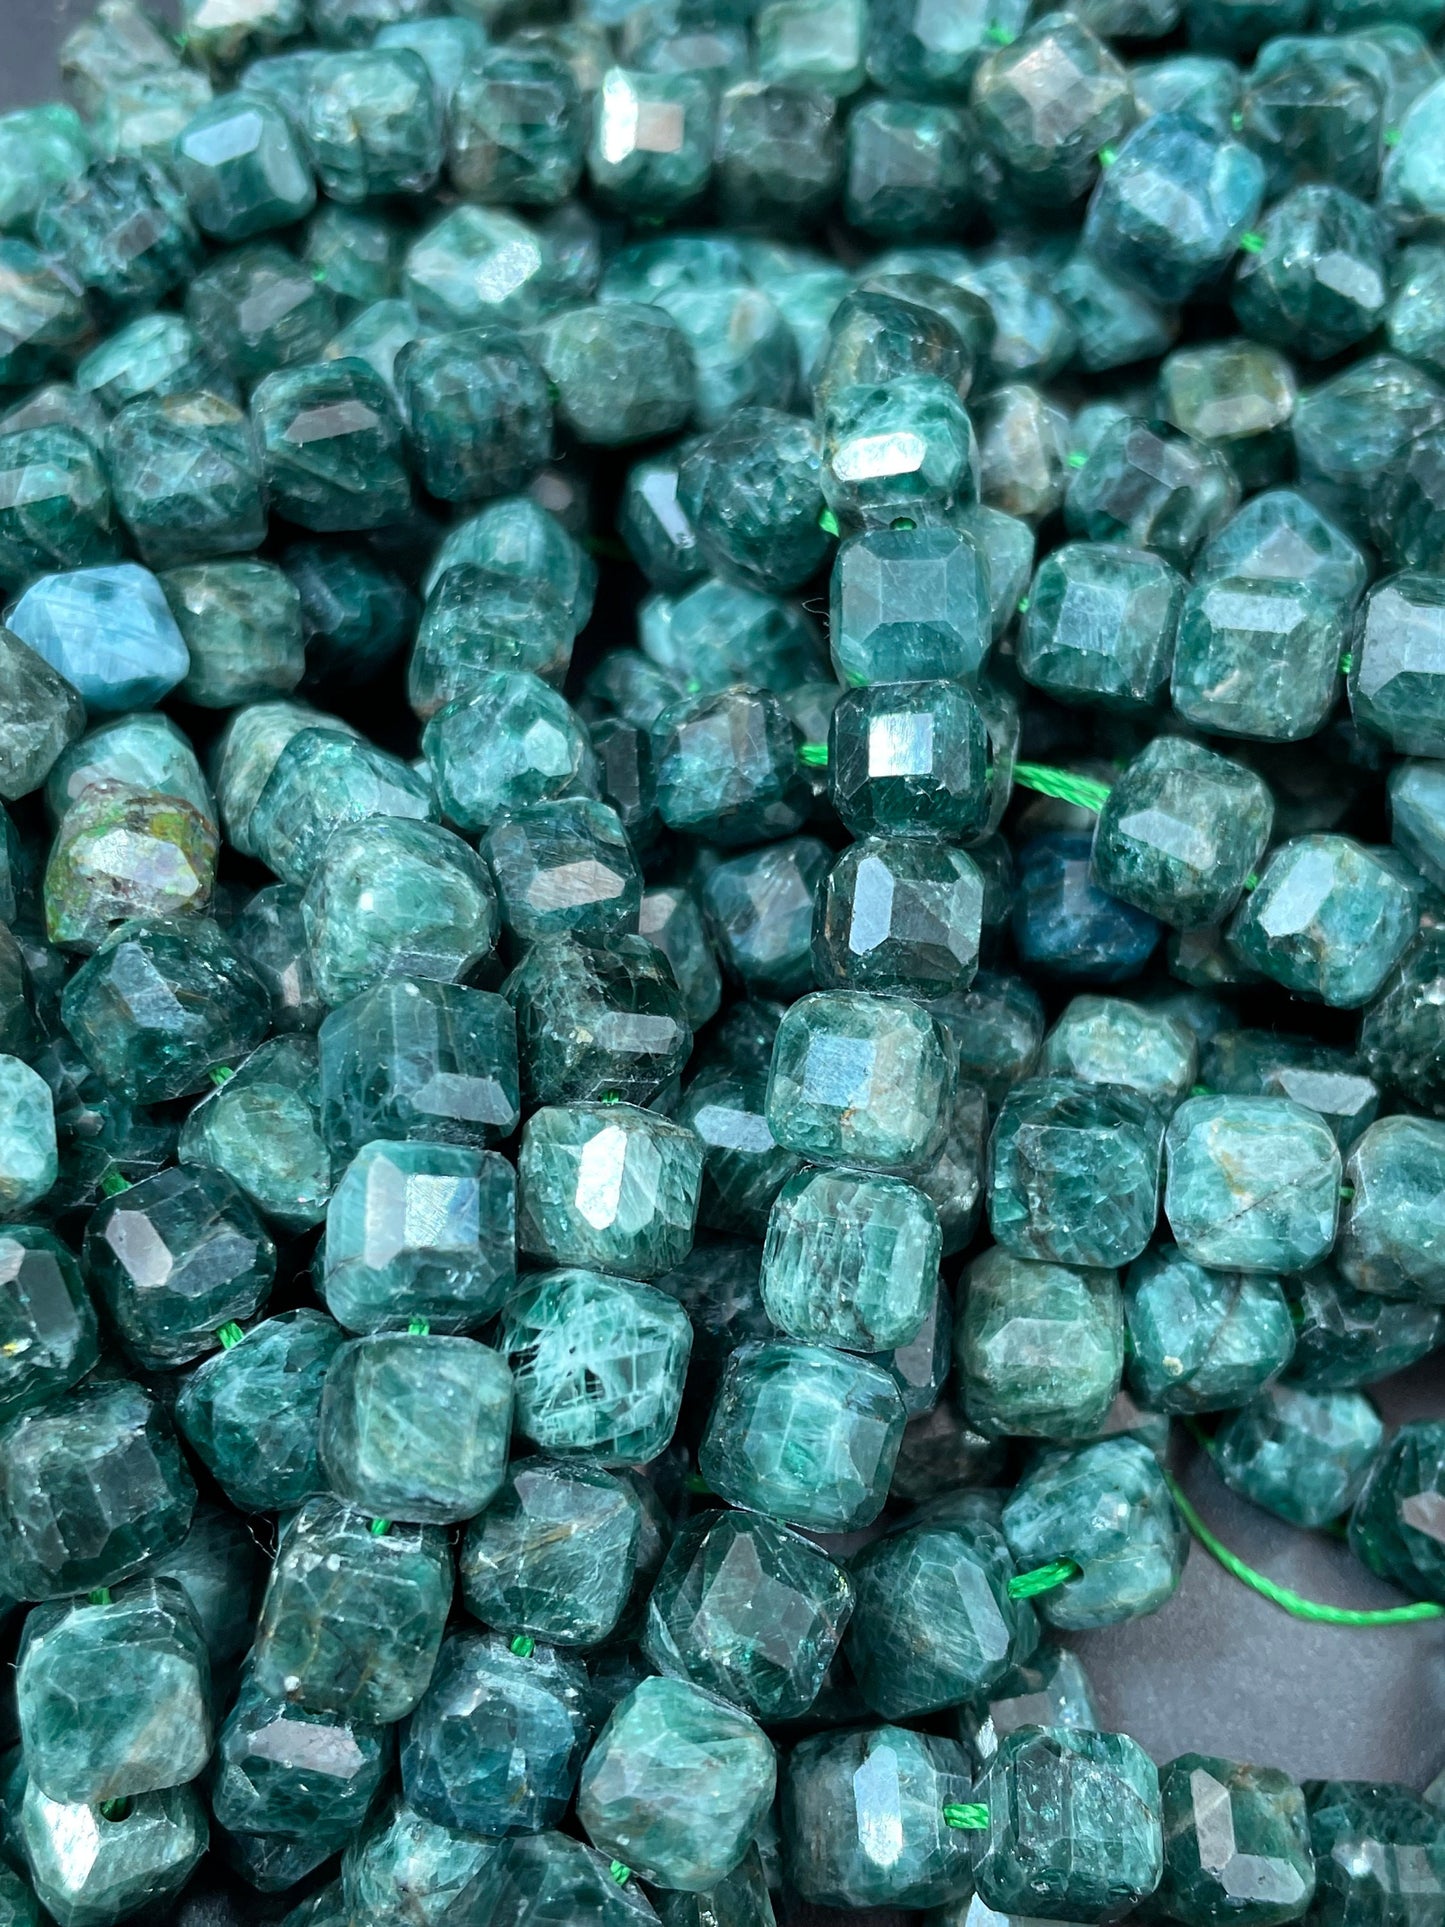 AAA Natural Emerald Gemstone Bead Faceted 6mm 8mm Cube Shape, Gorgeous Natural Green Color Emerald Gemstone Bead